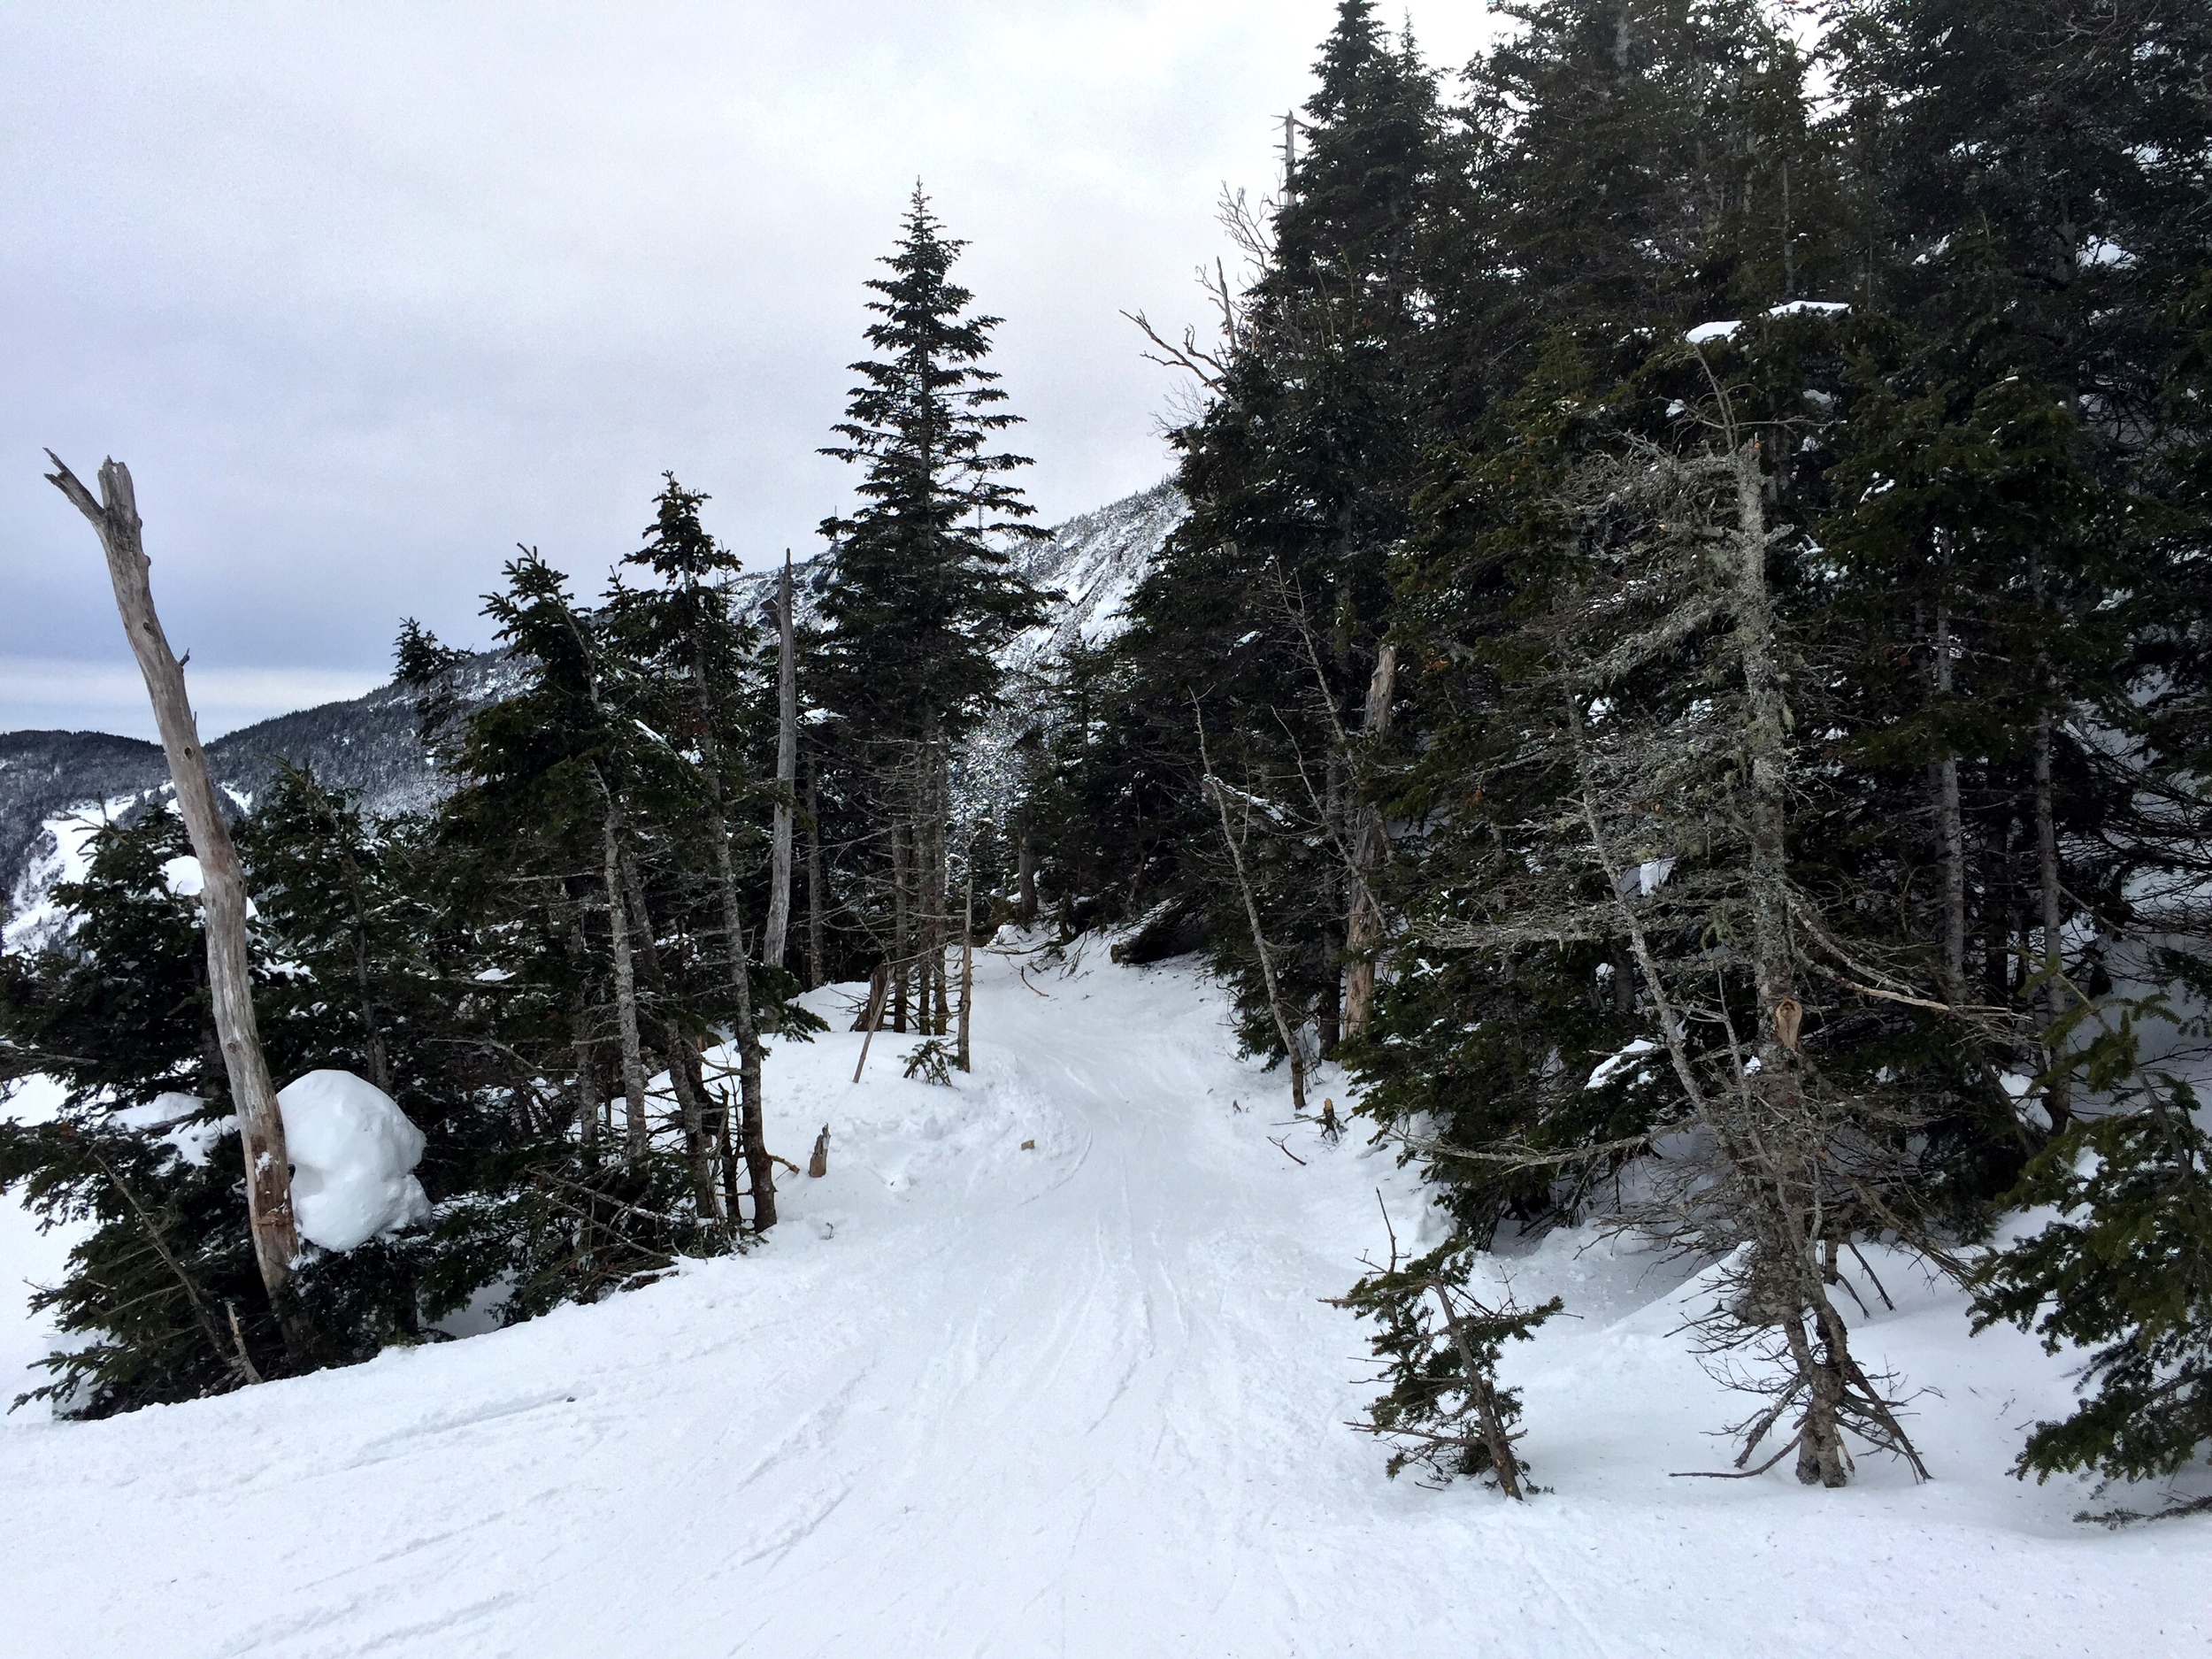 Grungy Slopes, Stowe Vermont, Stowe Mountain Lodge 27.jpg